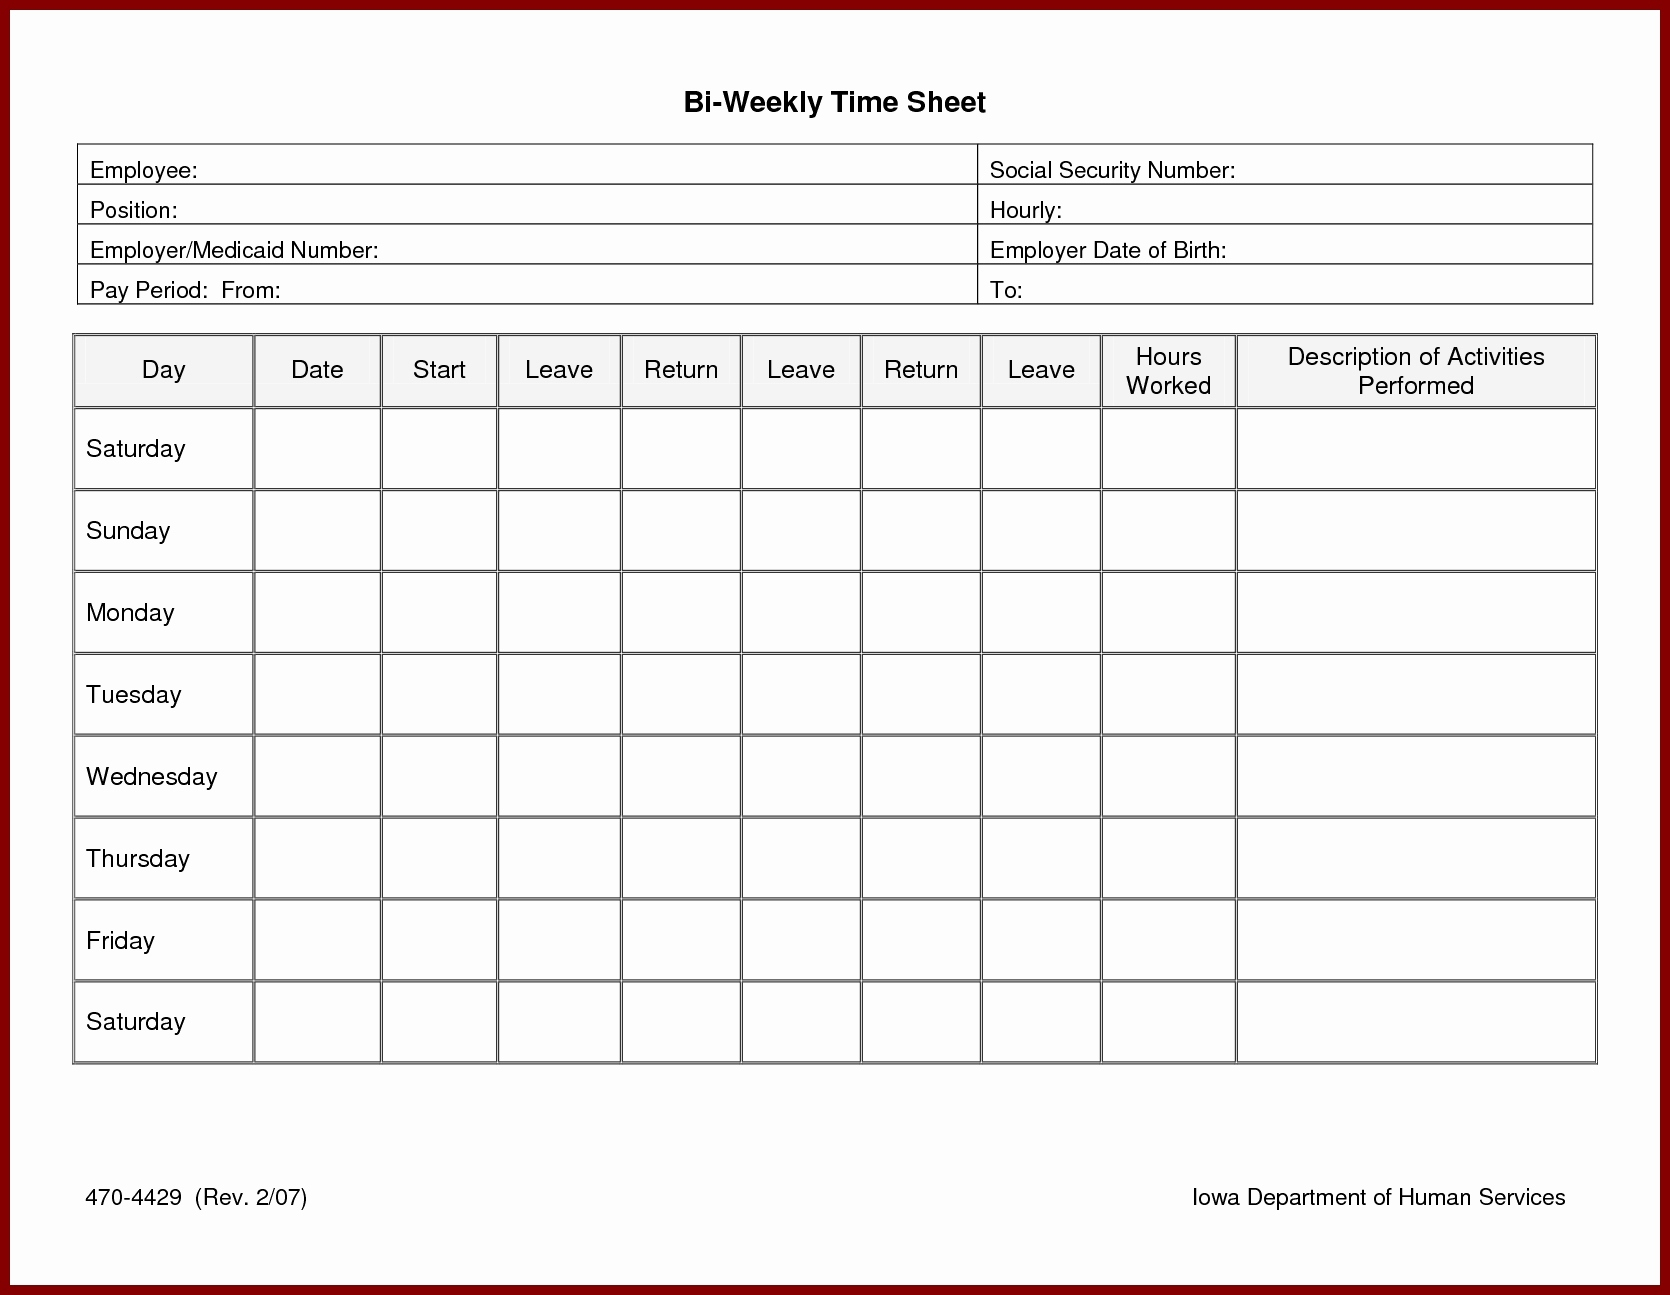 Tax Return Spreadsheet Template Uk Inside Business Expense Spreadsheet For Taxes Beautiful Tax Return For Tax